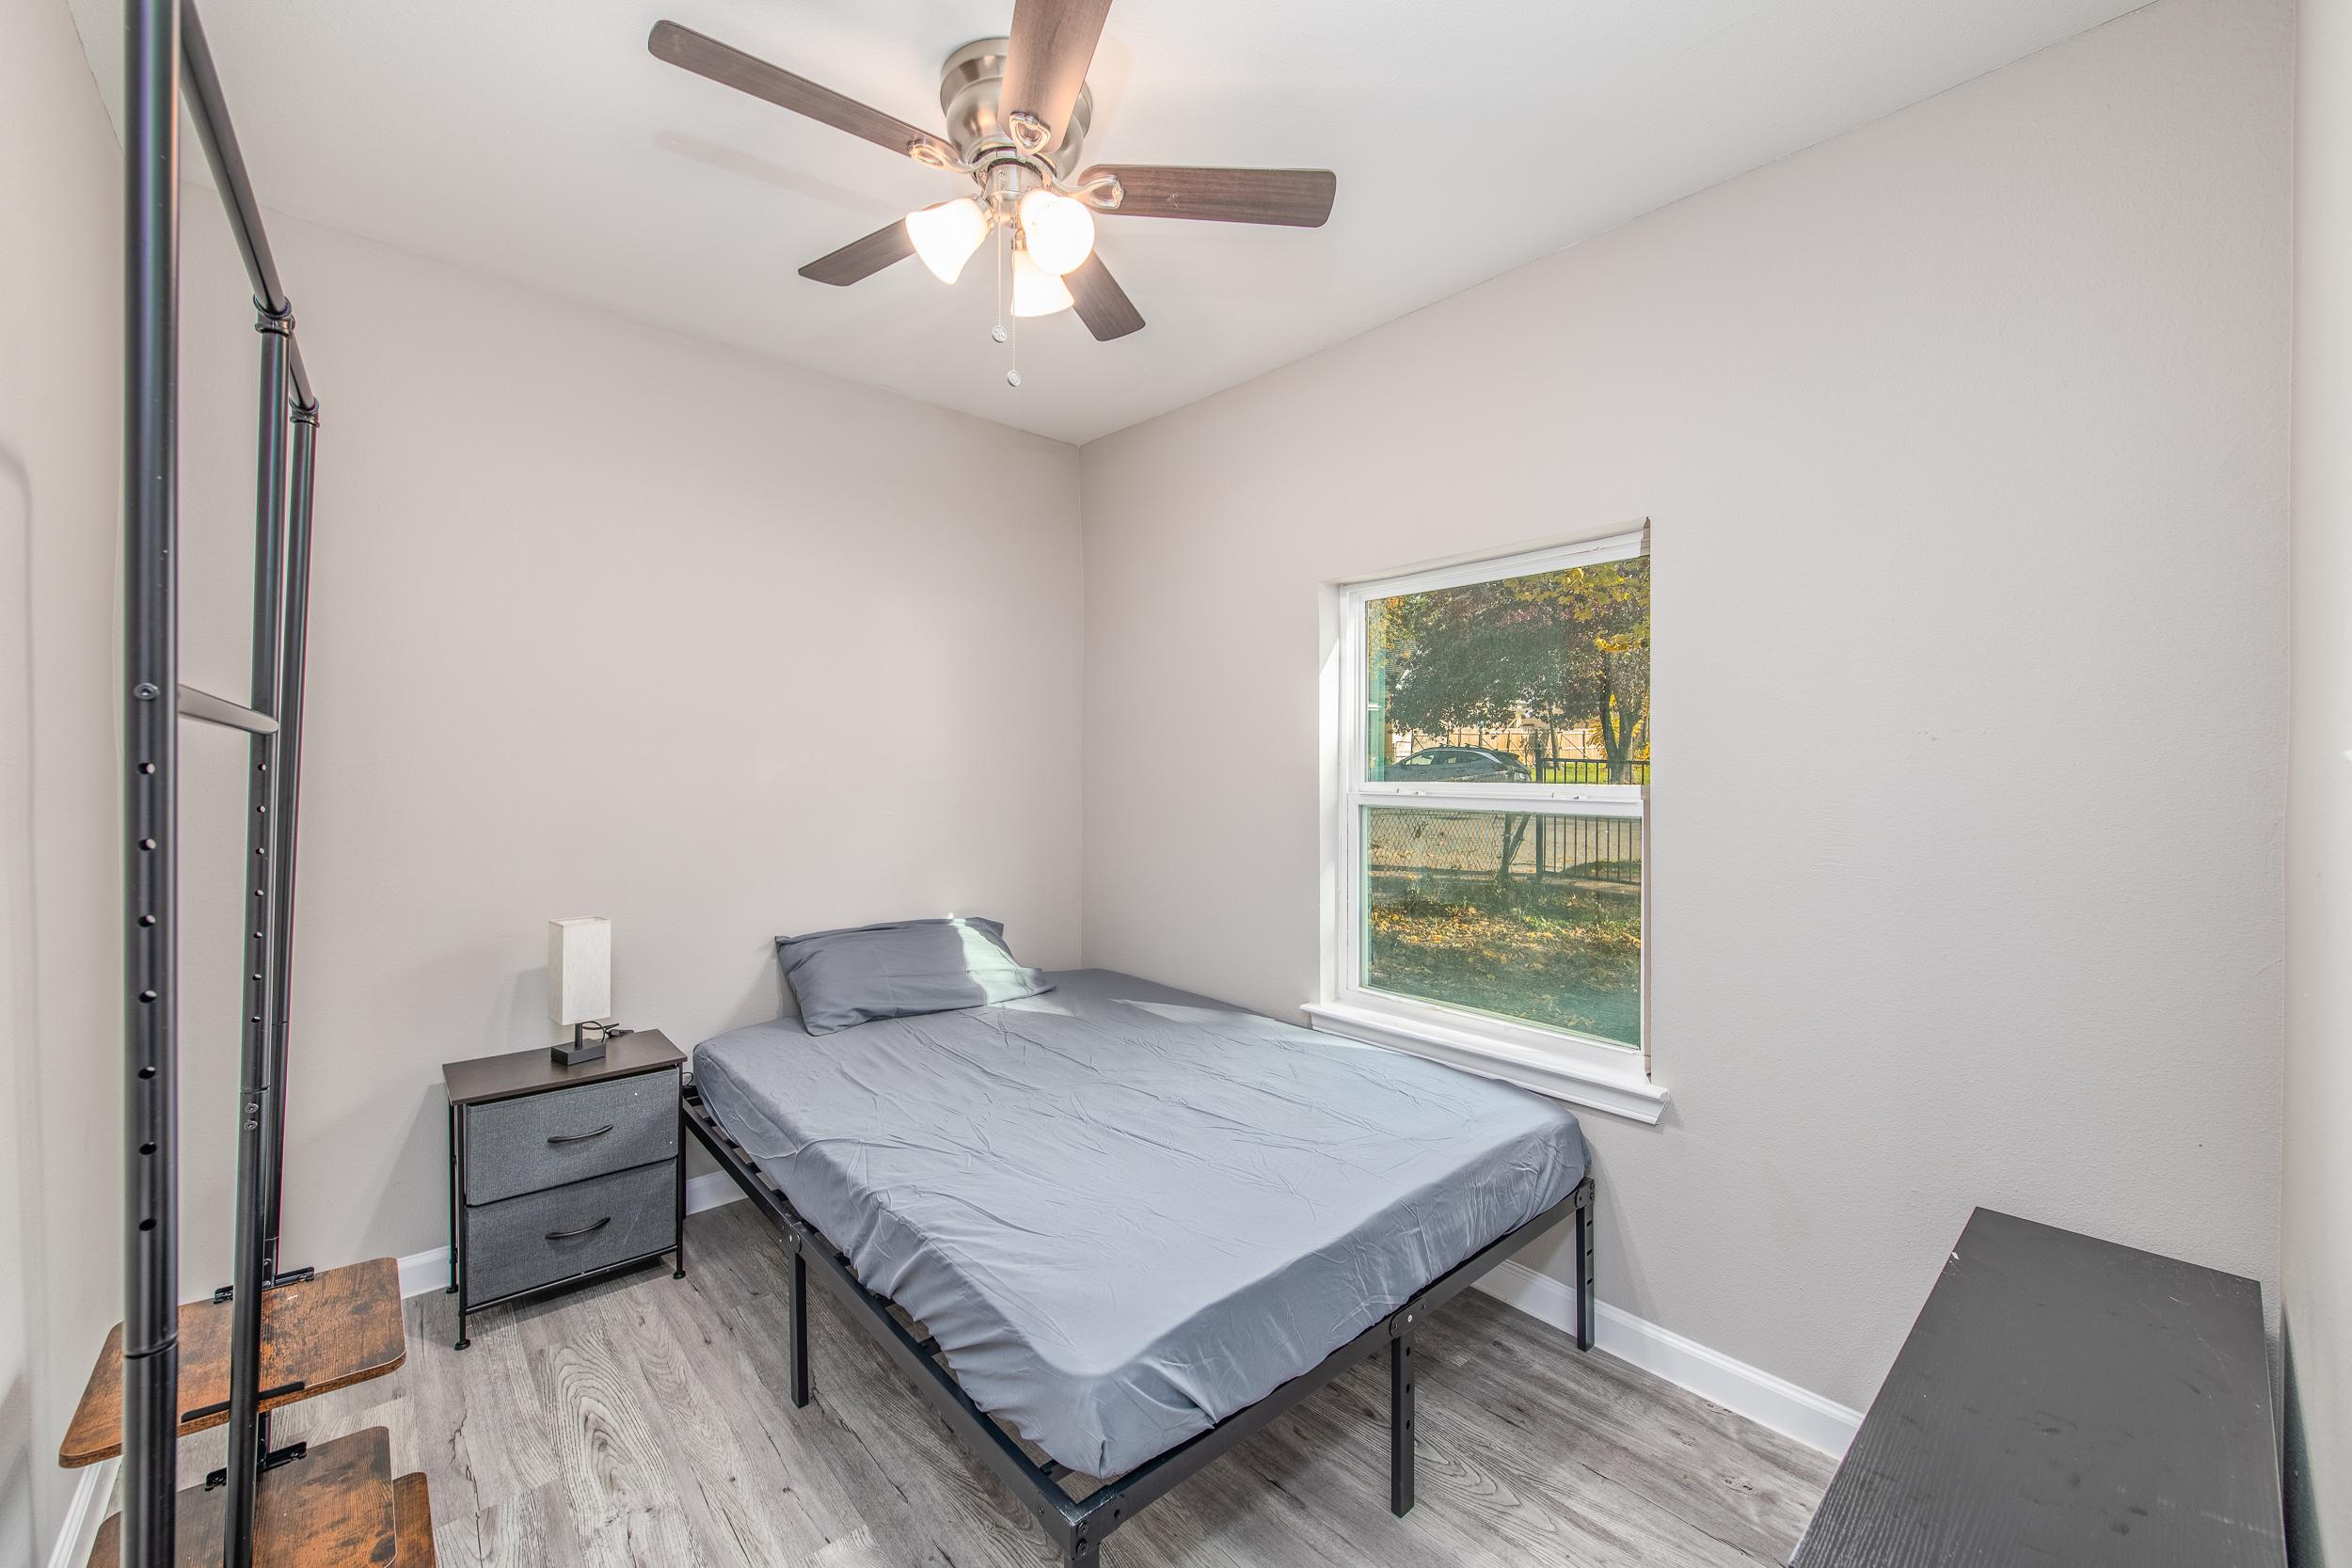 Dallas, TX Affordable Rooms for Rent from $149